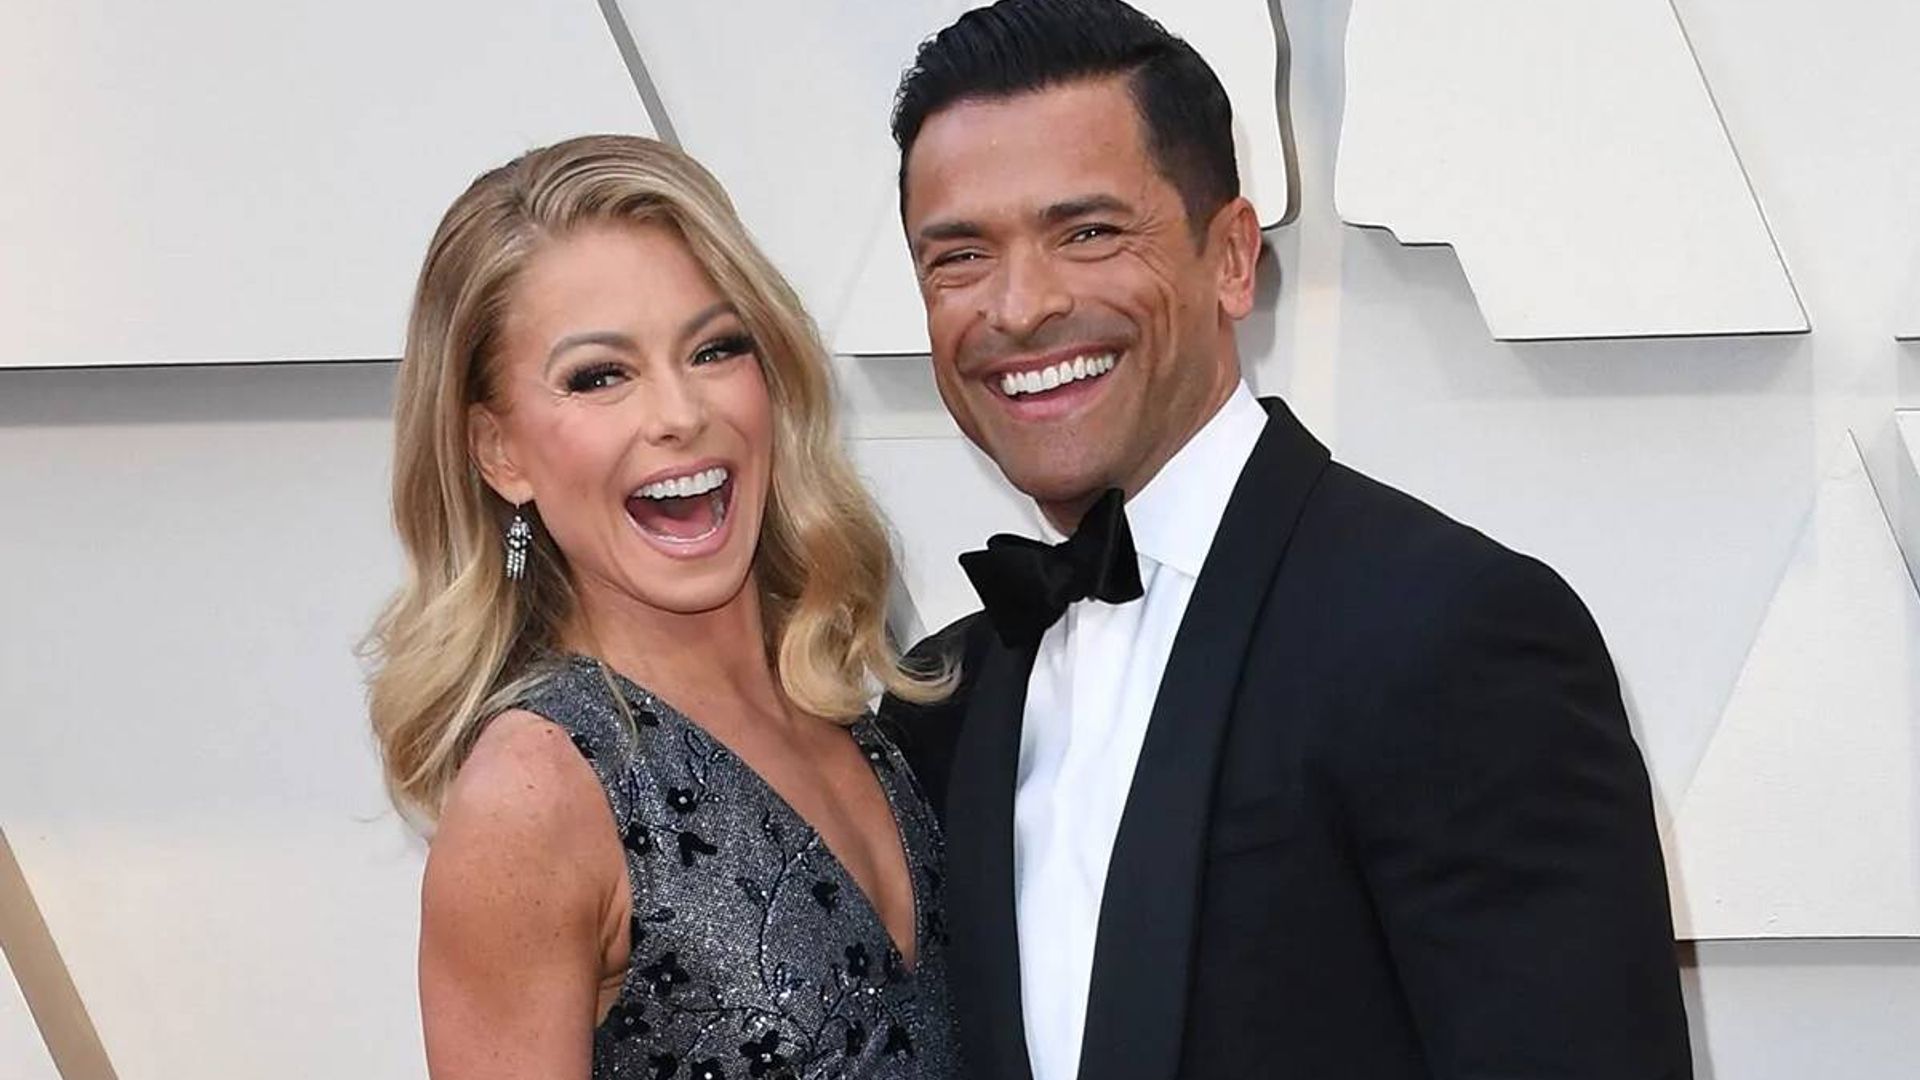 Kelly Ripa's hilarious family photo is too good to miss